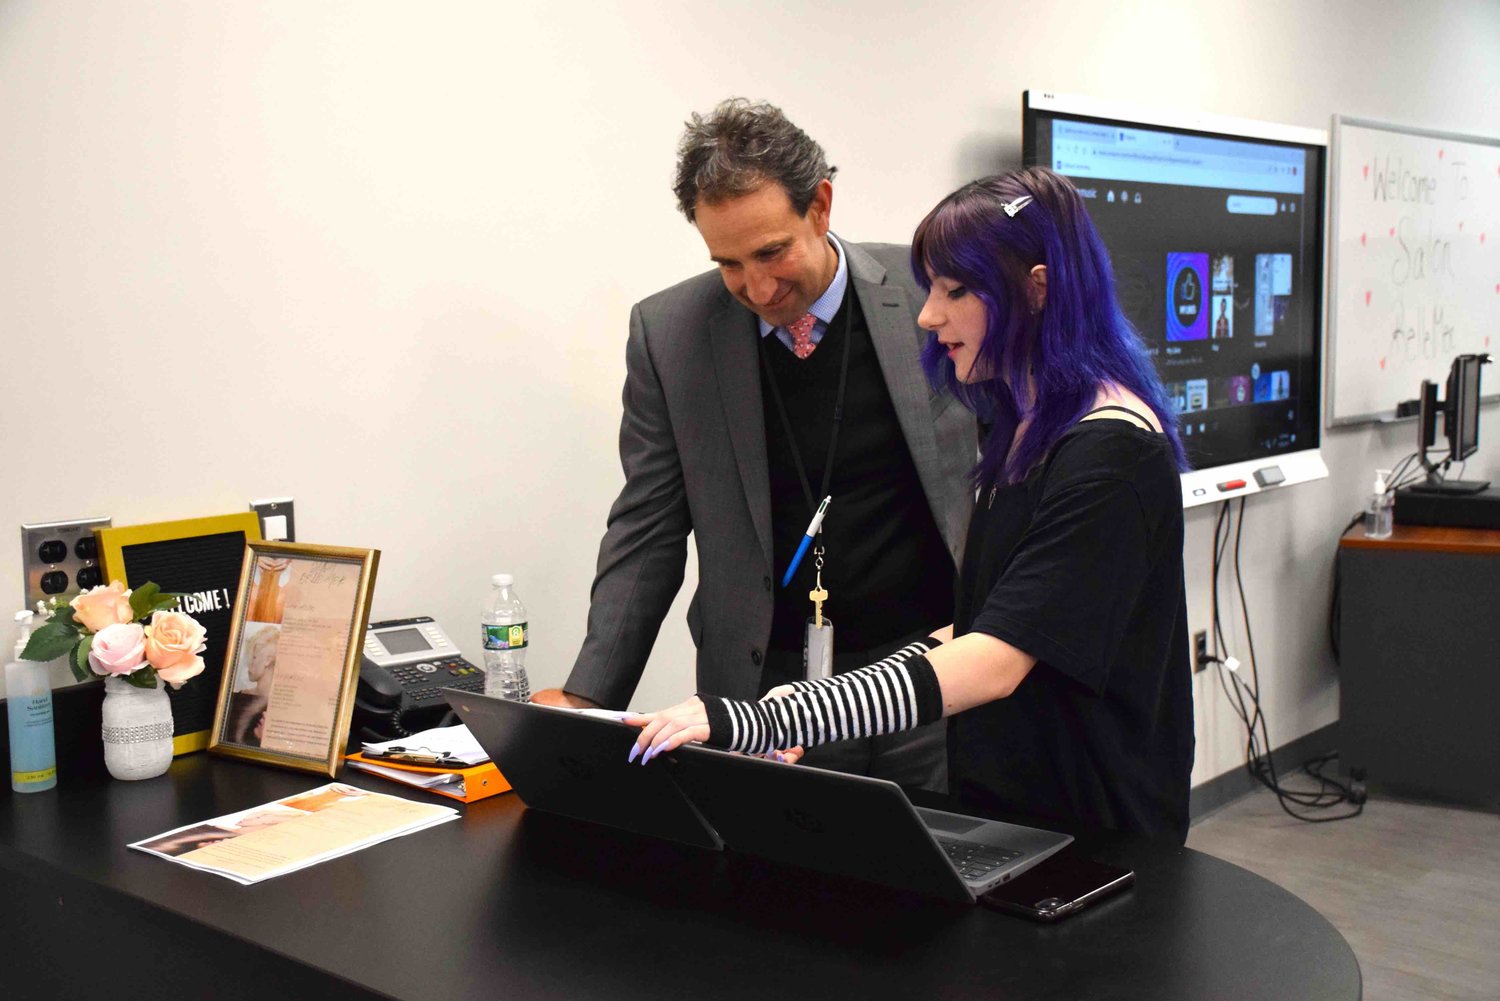 At the grand opening, Scott Bersin, the district’s assistant superintendent of instruction, learned about the booking platform that student Rebecca Rosensweige is using for the salon.